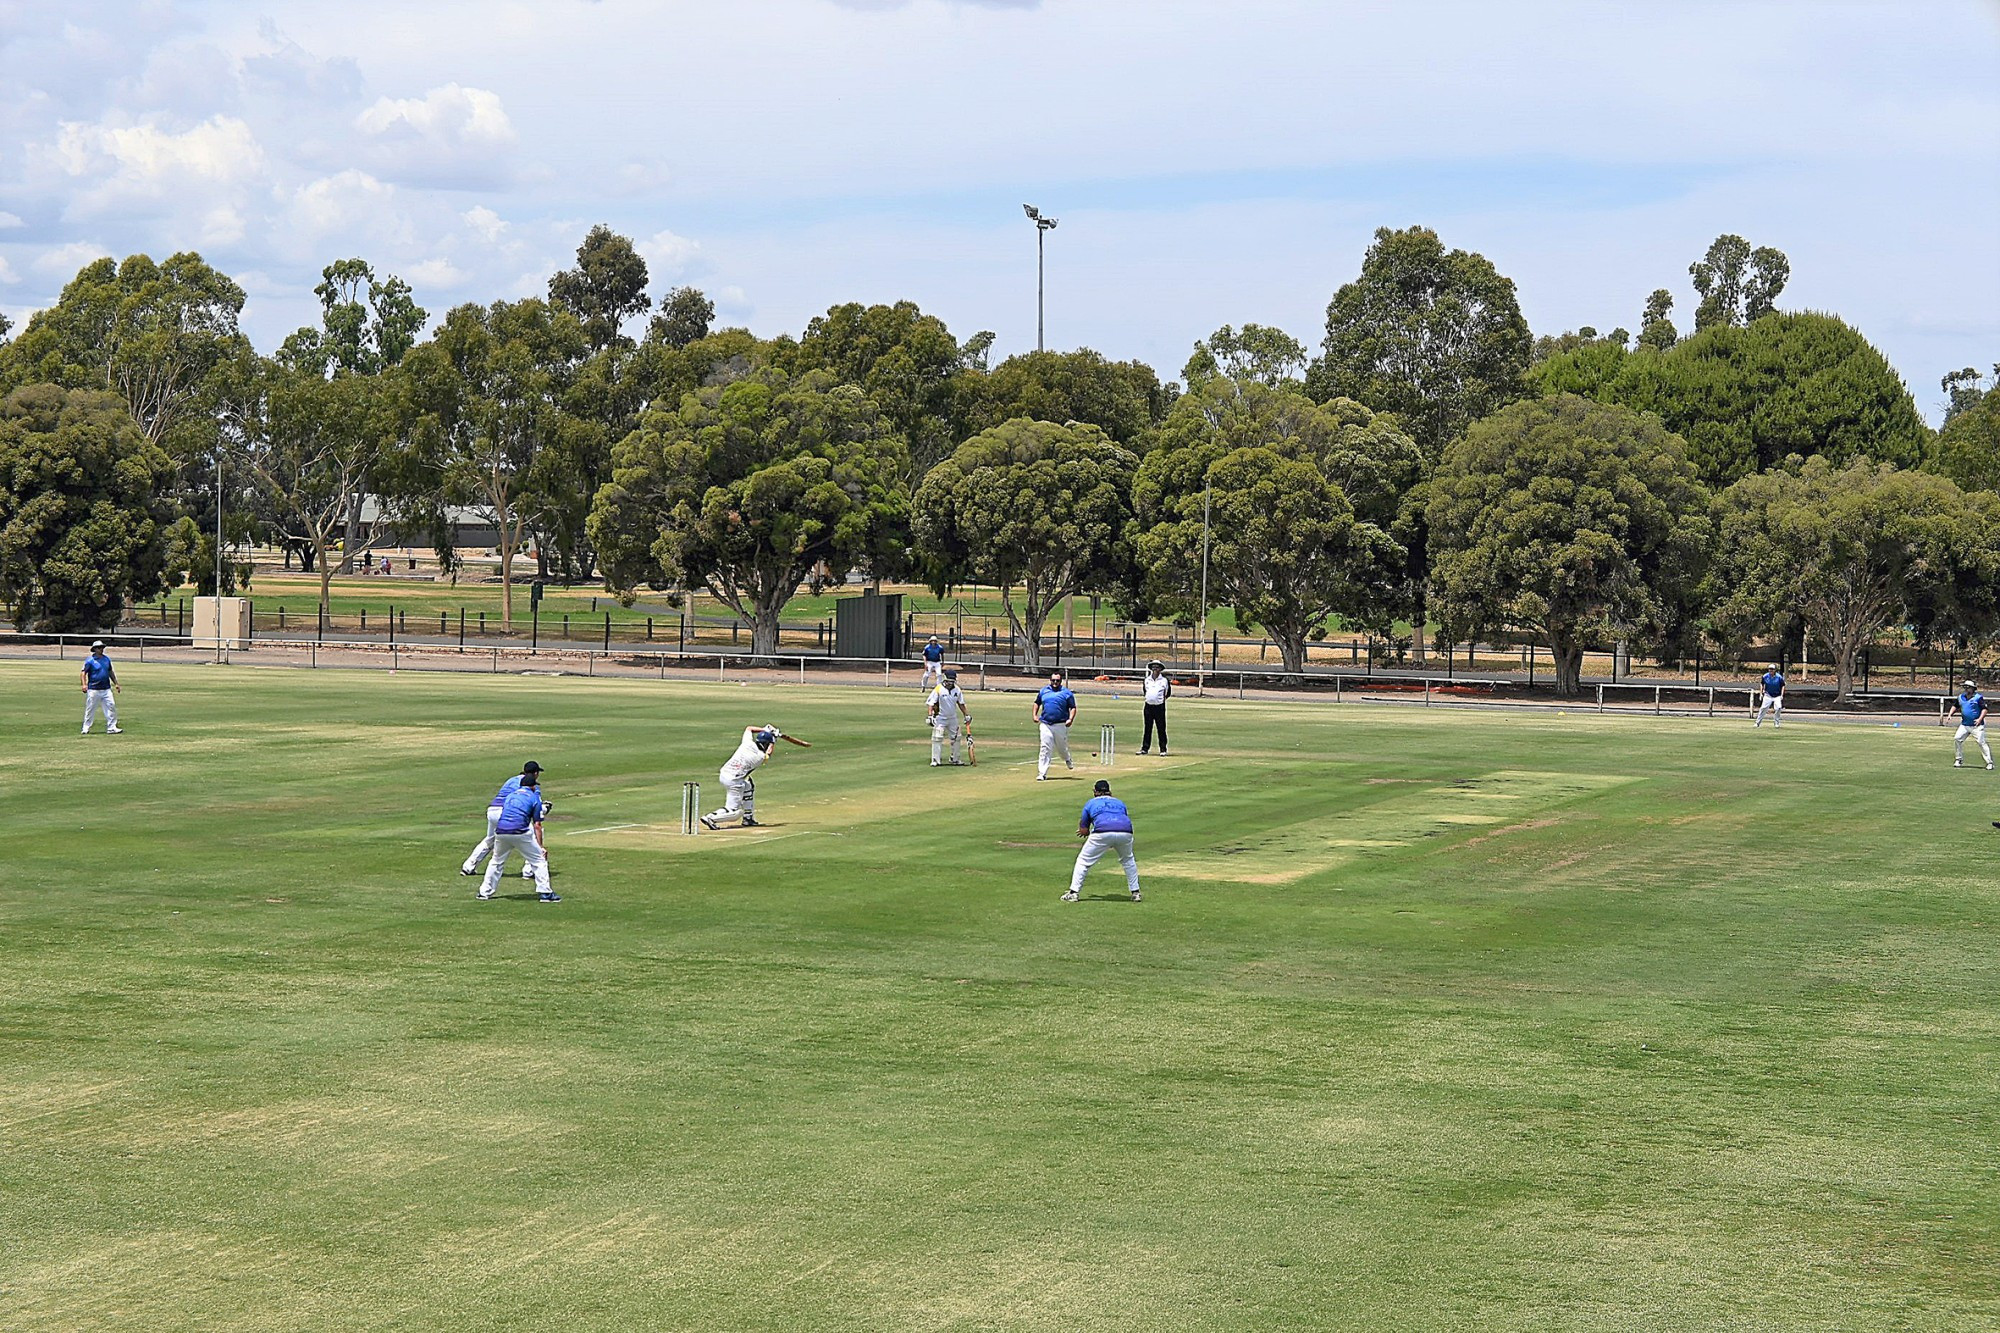 Jung Tigers opening batsman Brenton Hallam drives to the on side during Saturday's clash against Jung Tigers.